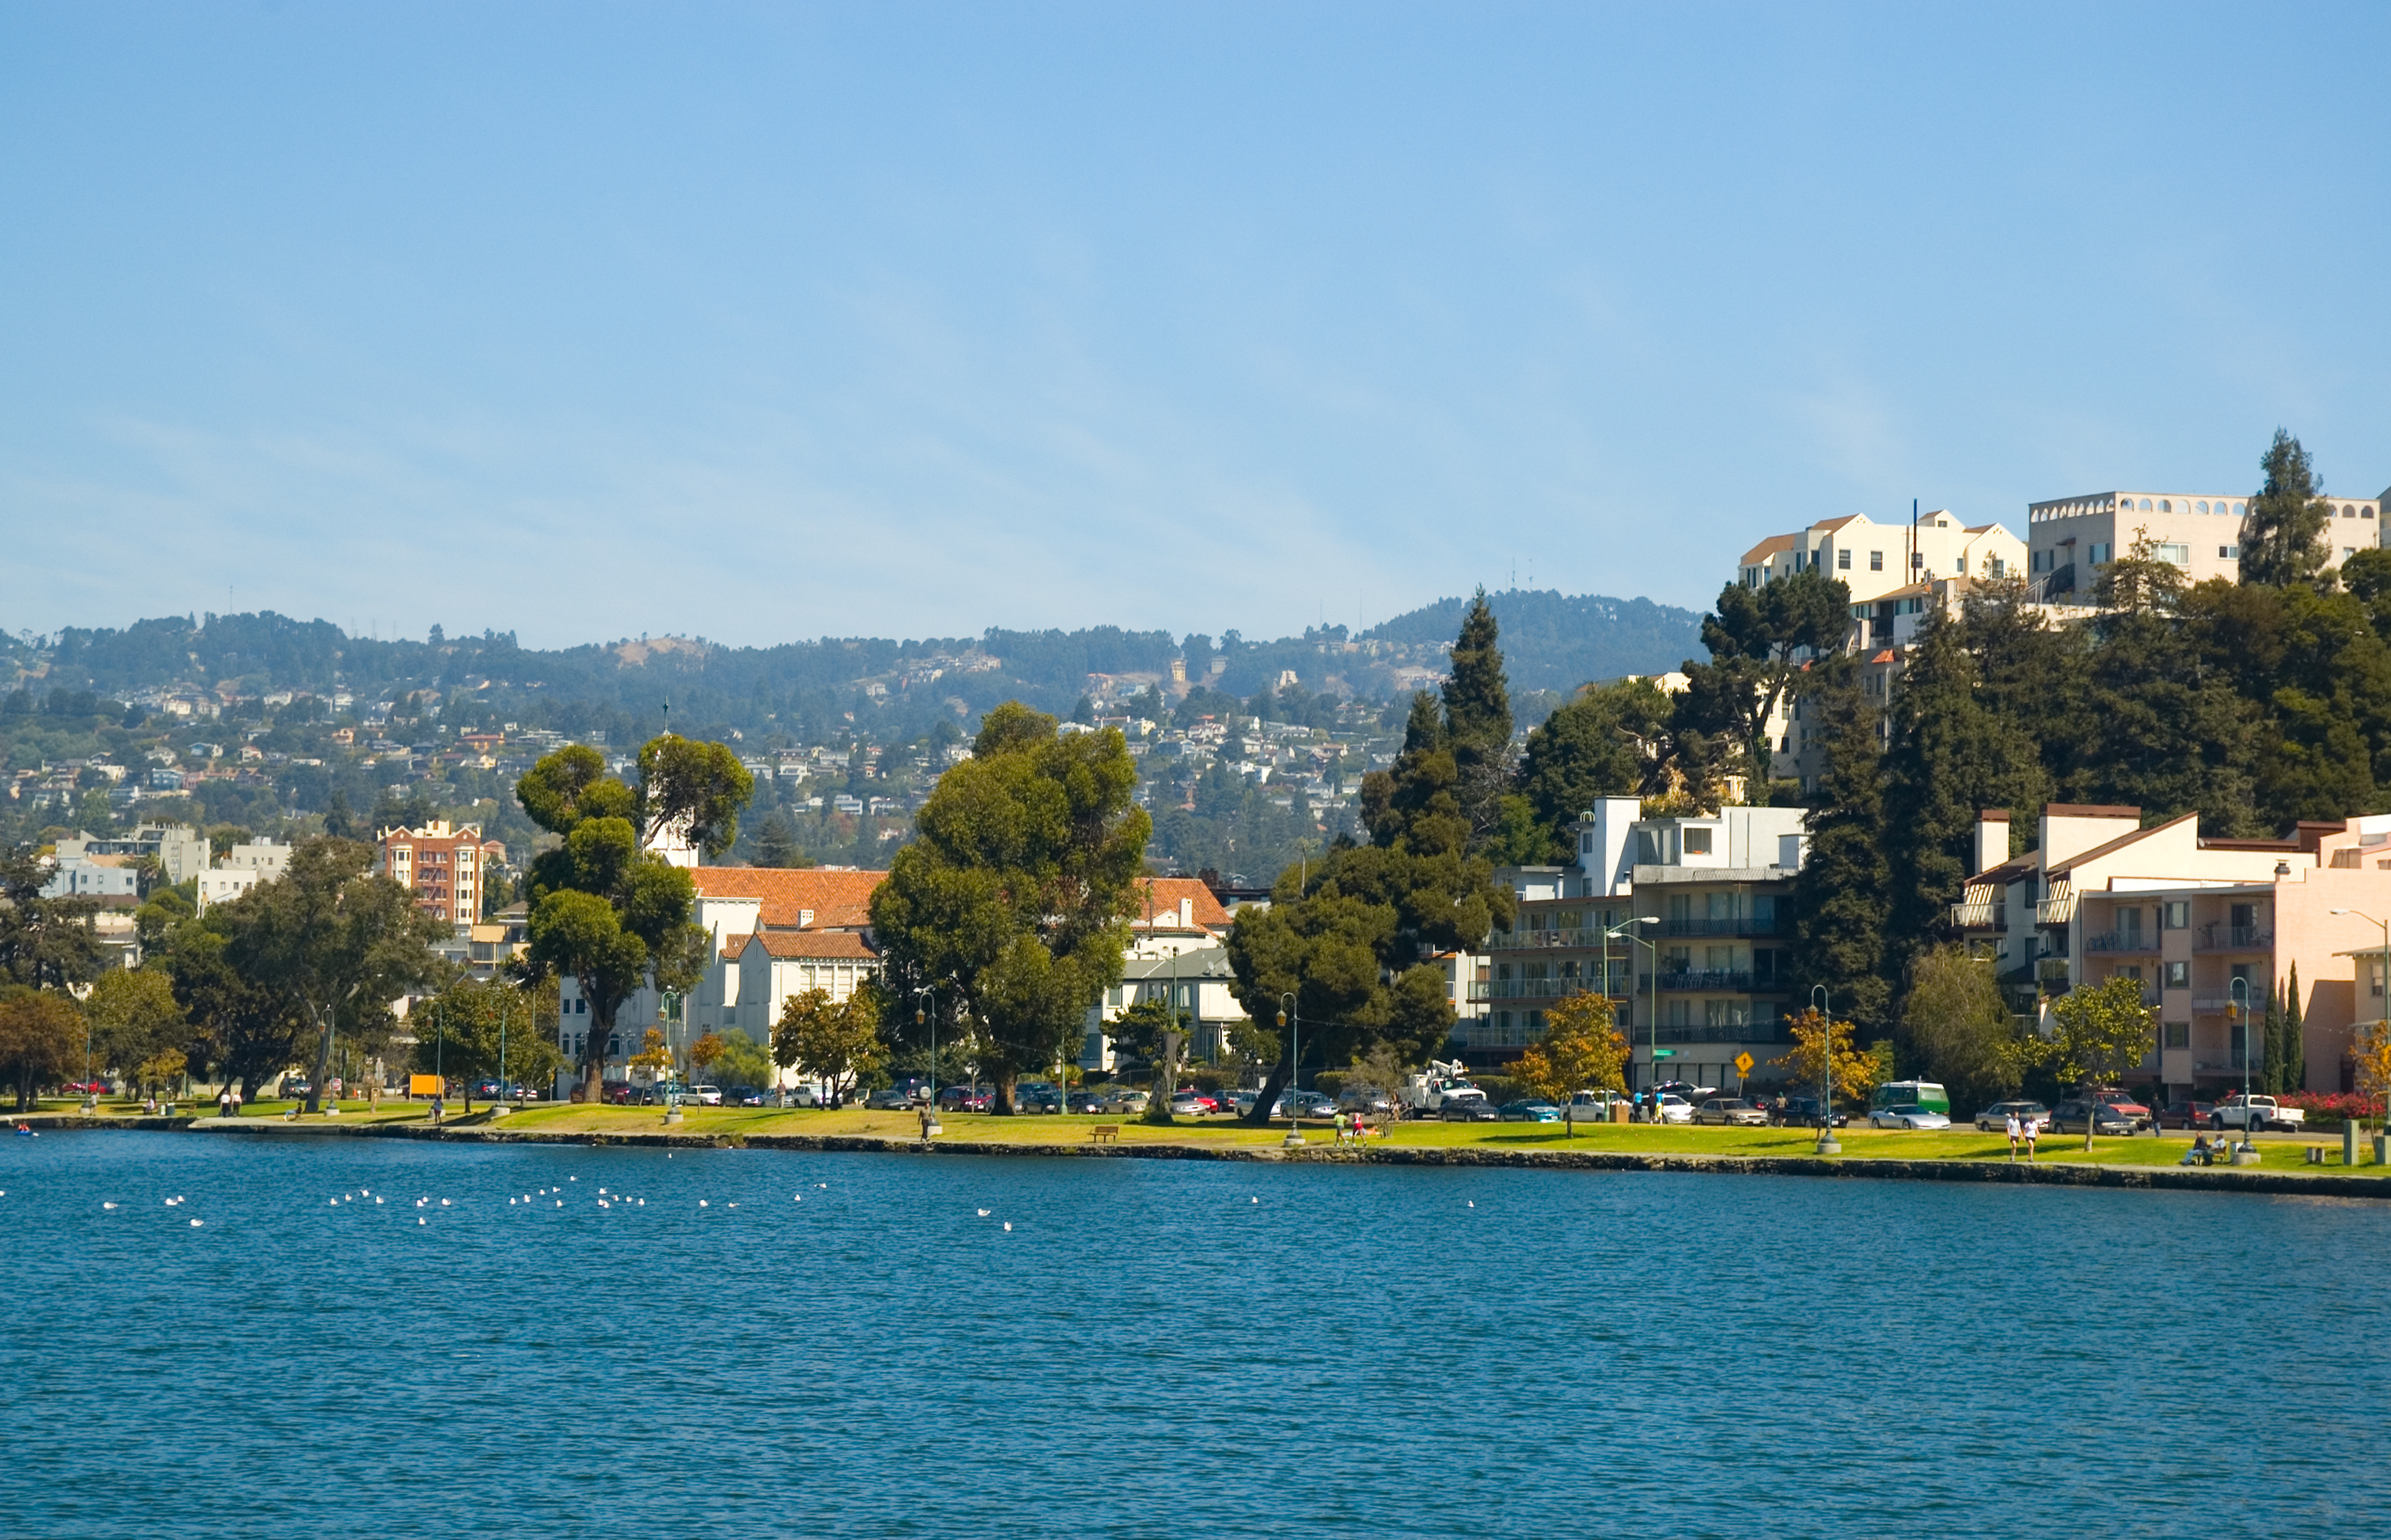 Lake Merritt, park, apartment buildings, trees, and the Oakland Hills in the background